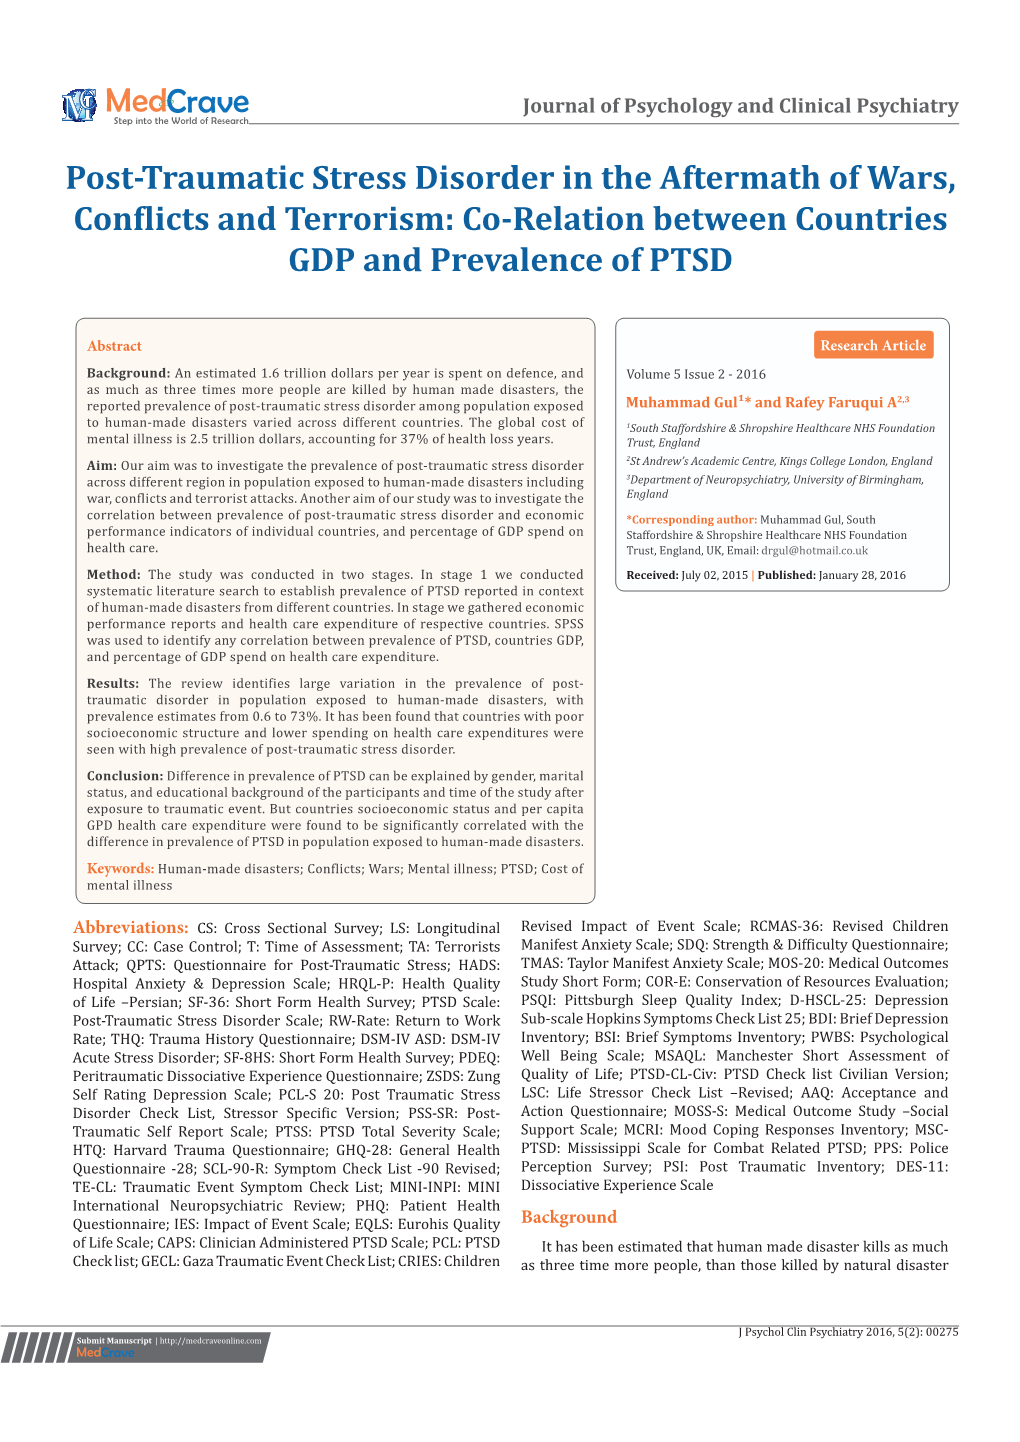 Post-Traumatic Stress Disorder in the Aftermath of Wars, Conflicts and Terrorism: Co-Relation Between Countries GDP and Prevalence of PTSD